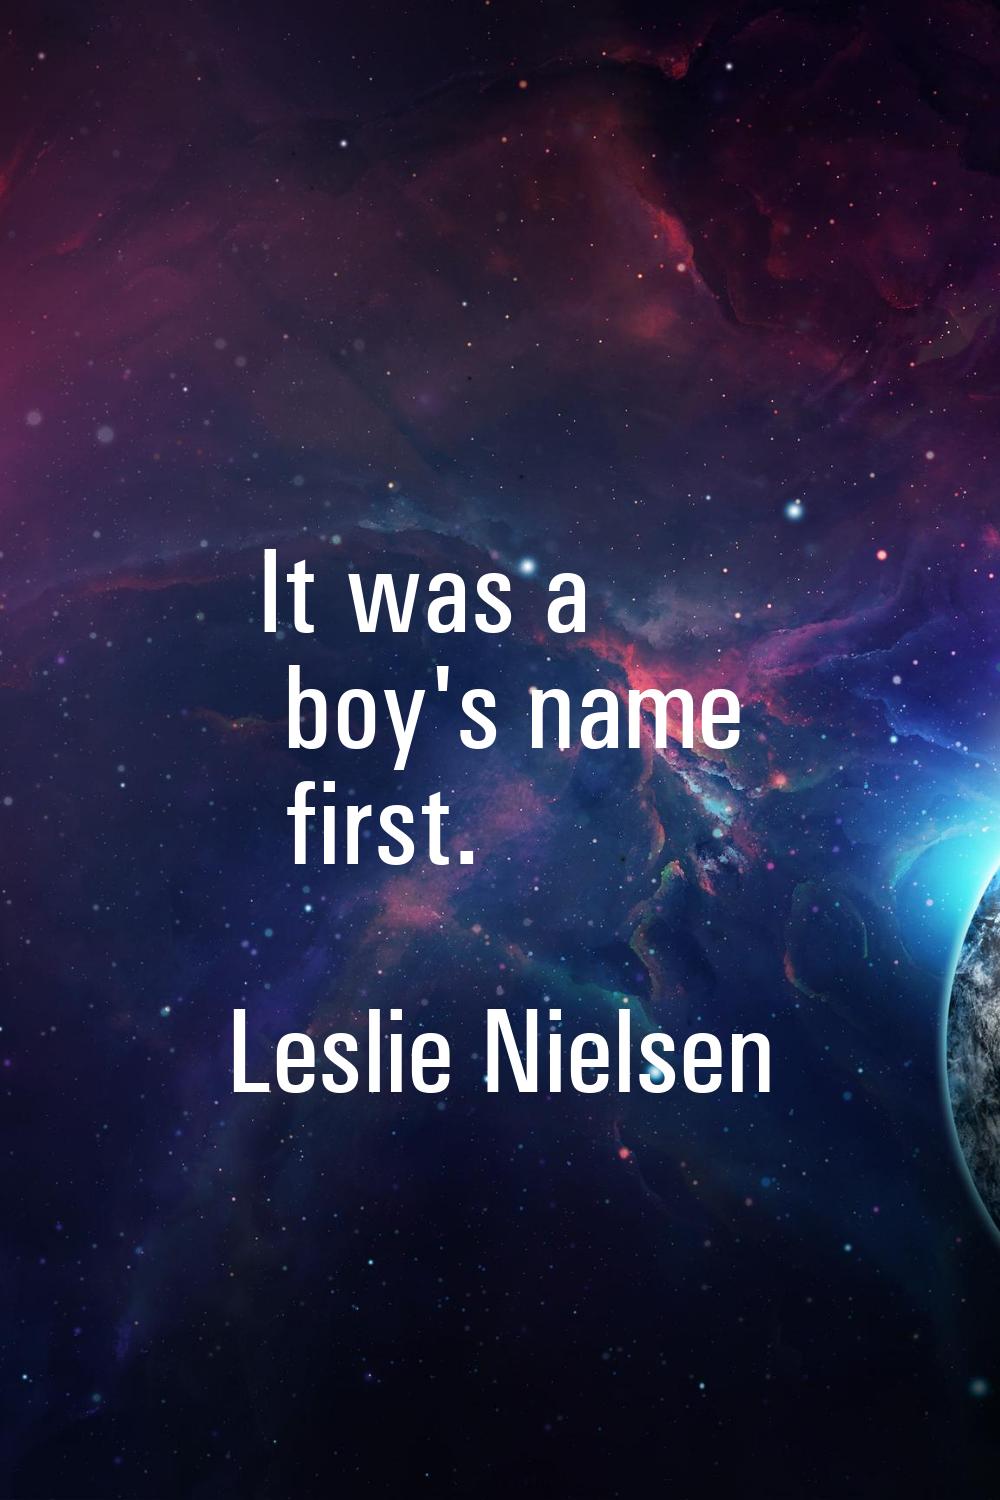 It was a boy's name first.